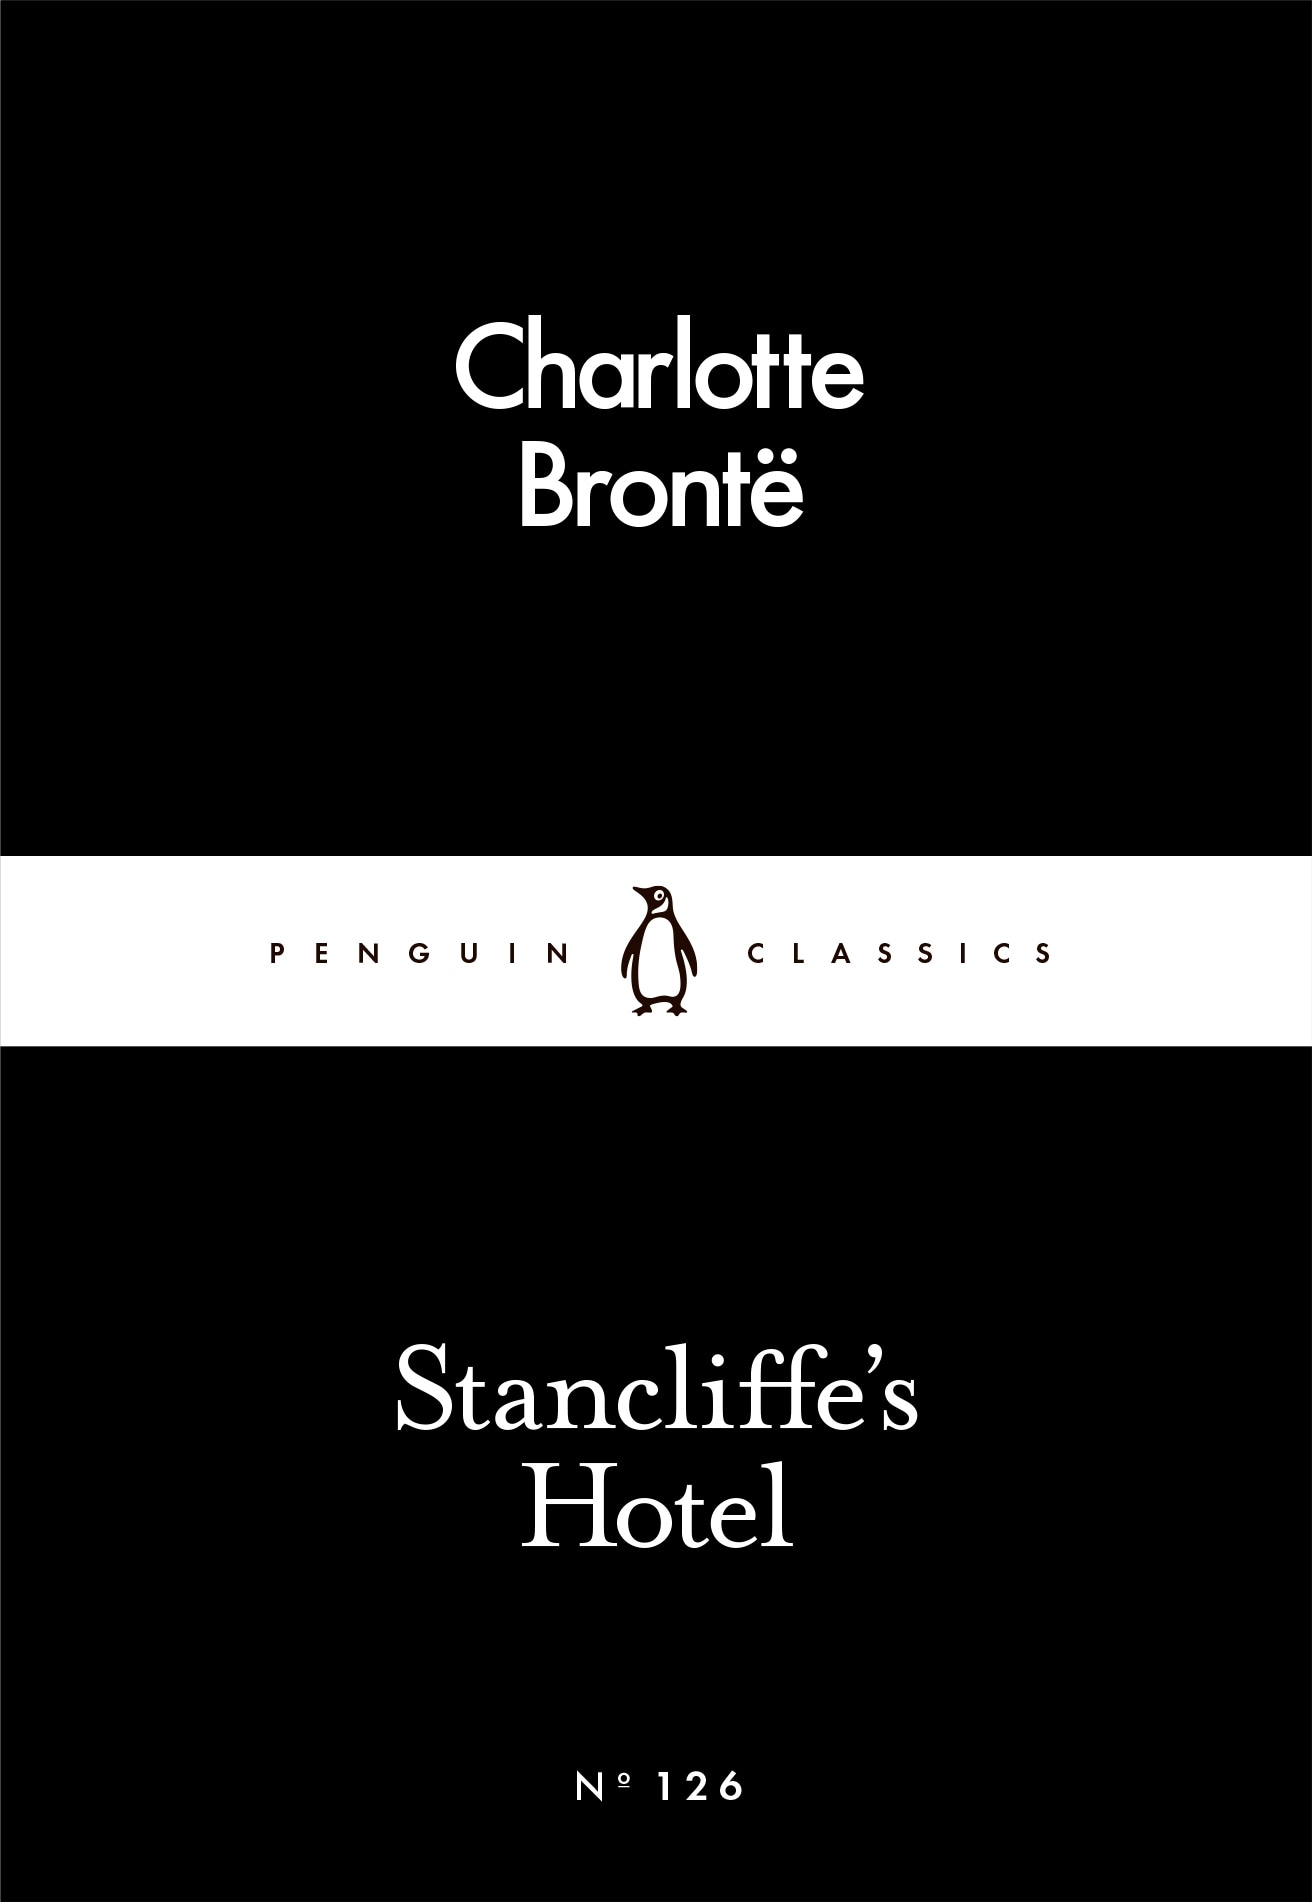 Book “Stancliffe's Hotel” by Charlotte Bronte — March 3, 2016